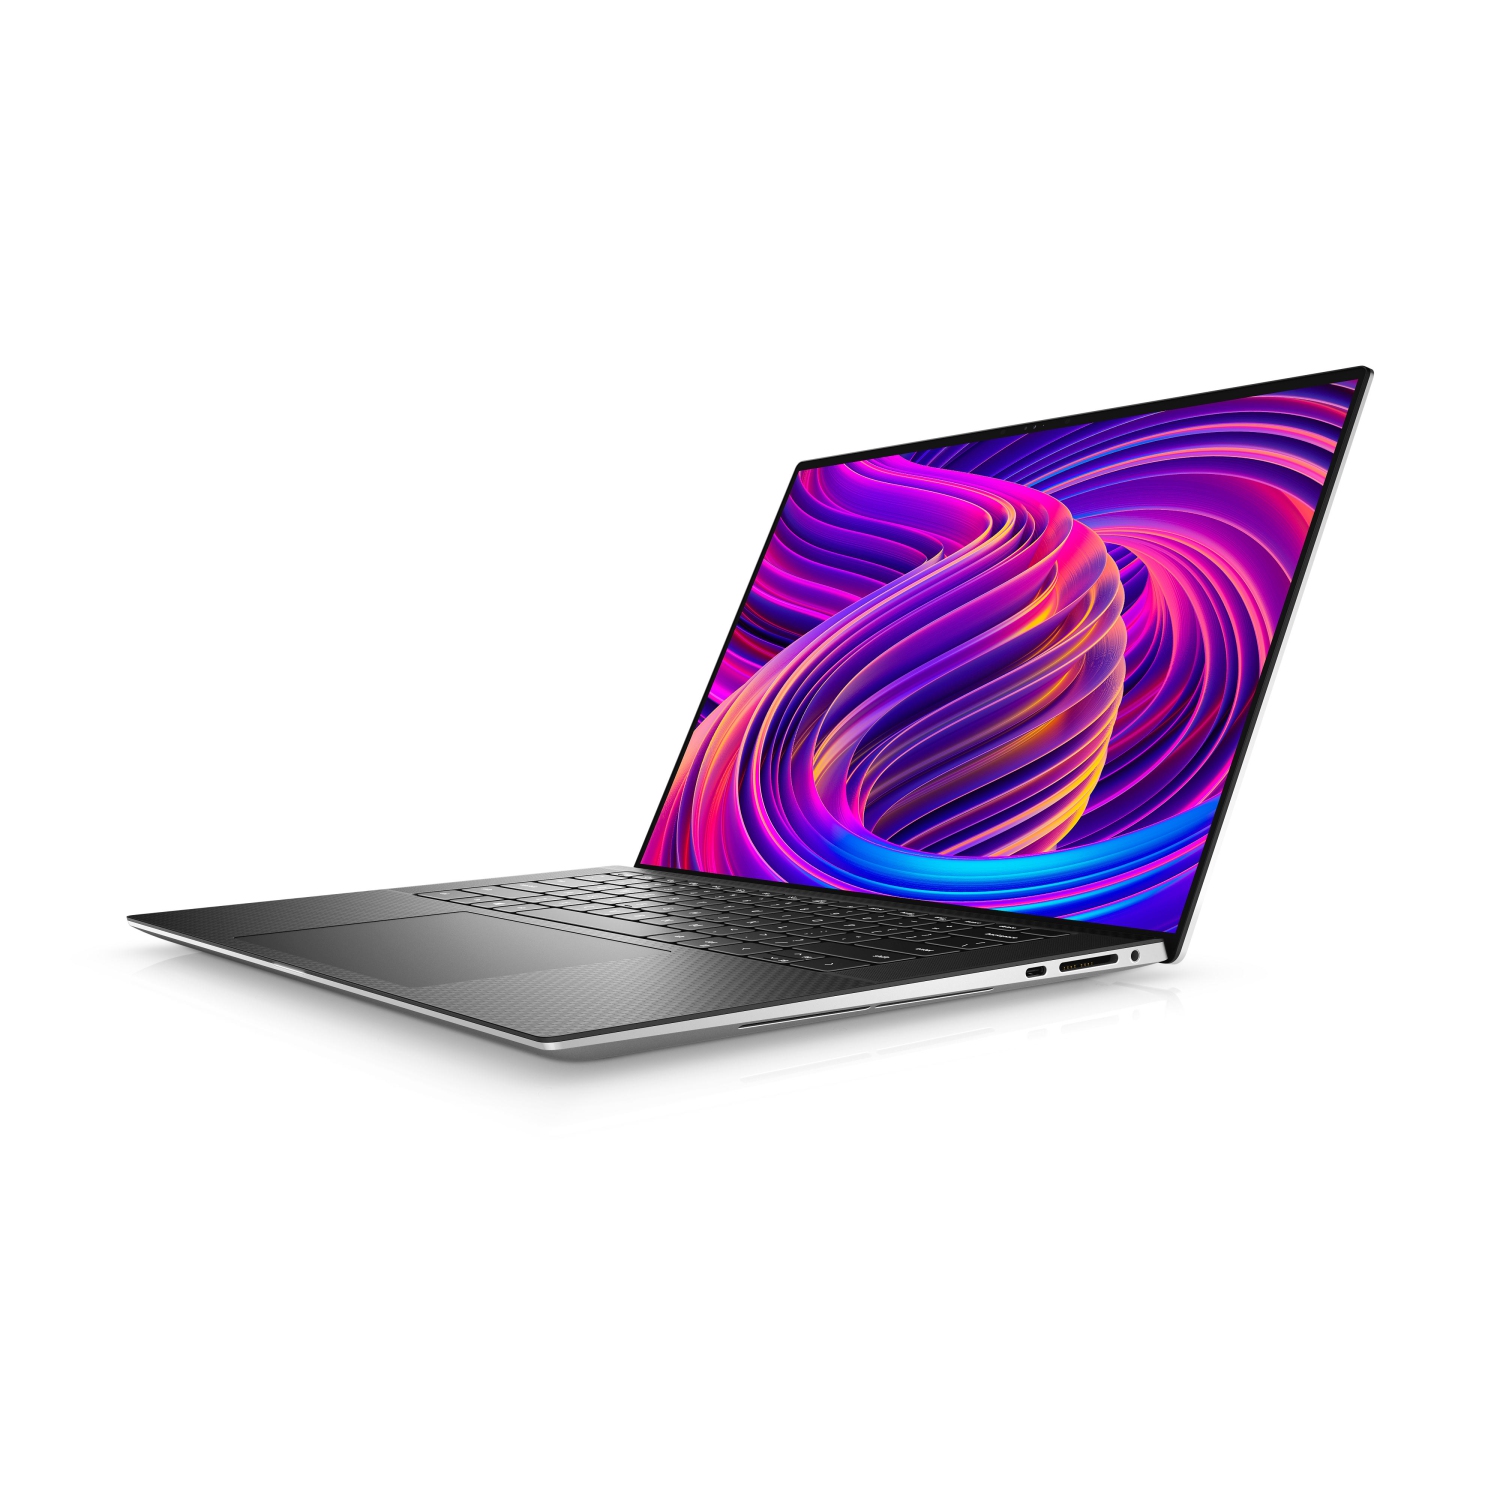 Refurbished (Excellent) - Dell XPS 15 9510 Laptop (2021) | 15.6" FHD+ | Core i5 - 2TB SSD - 64GB RAM | 6 Cores @ 4.5 GHz - 11th Gen CPU Certified Refurbished